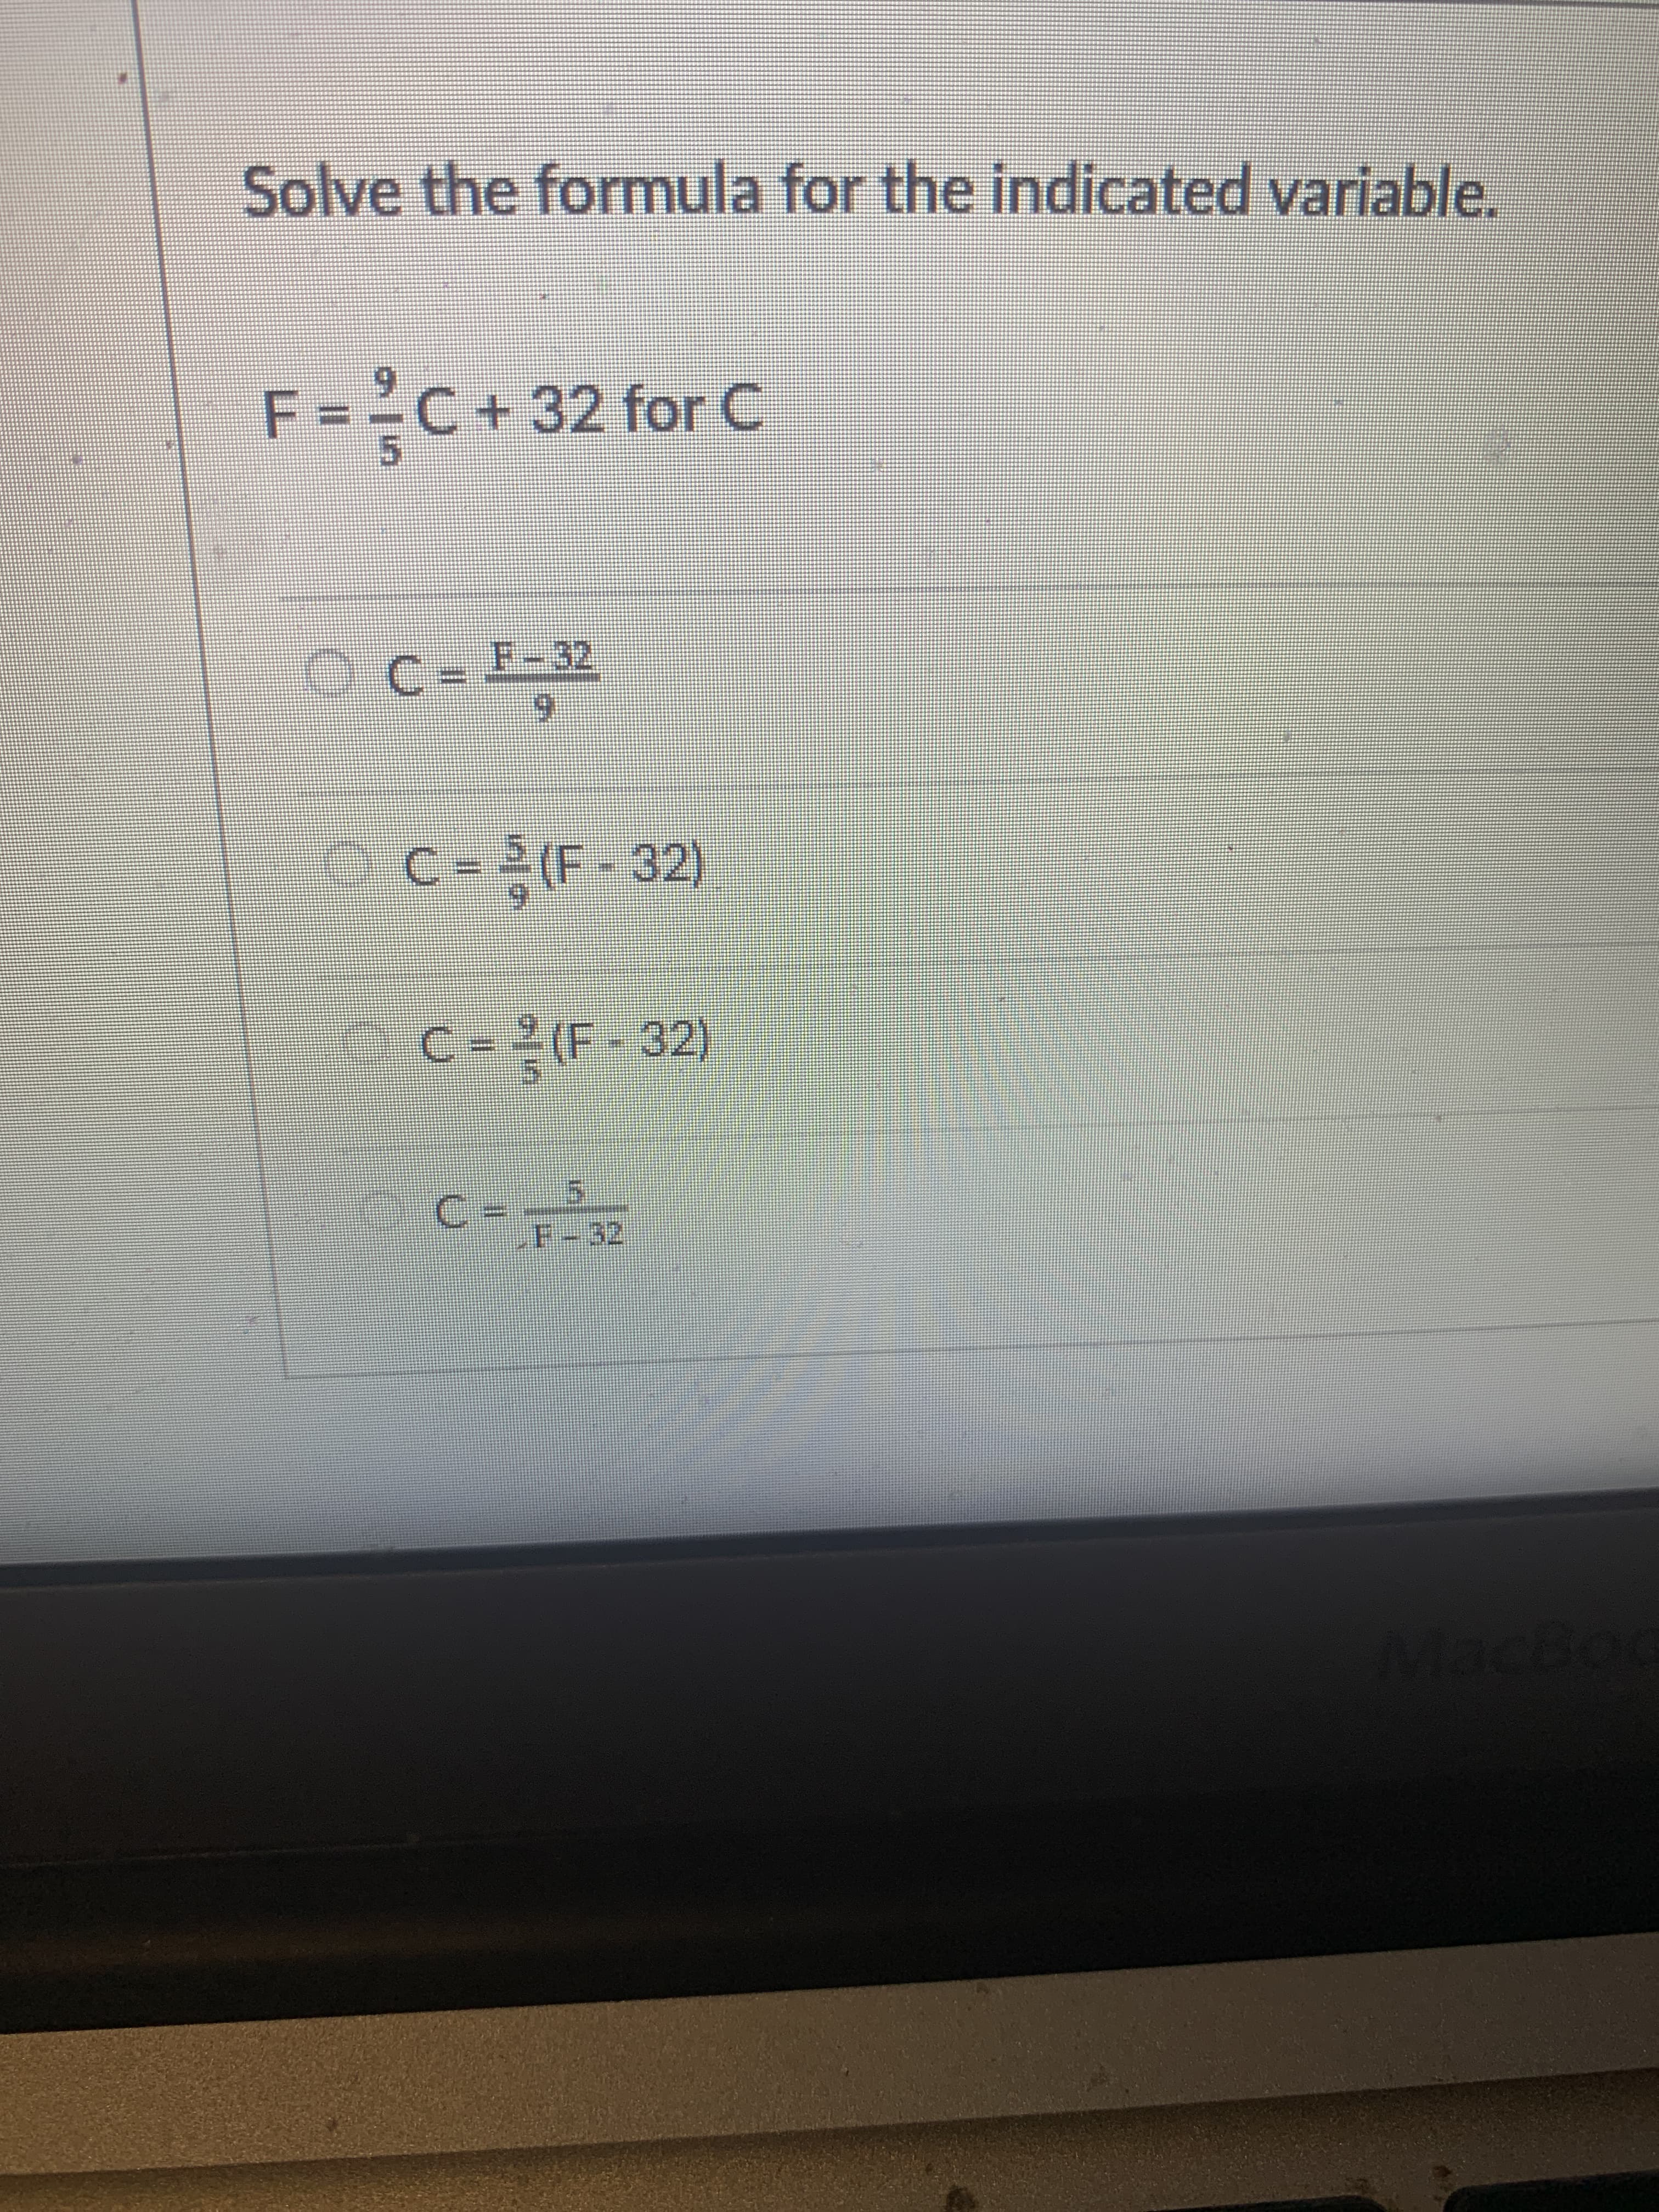 Solve the formula for the indicated variable.
F = ²C+32 for c
F-32
9.
OC=2 (F-32)
O C=(F-32)
3.
F.
